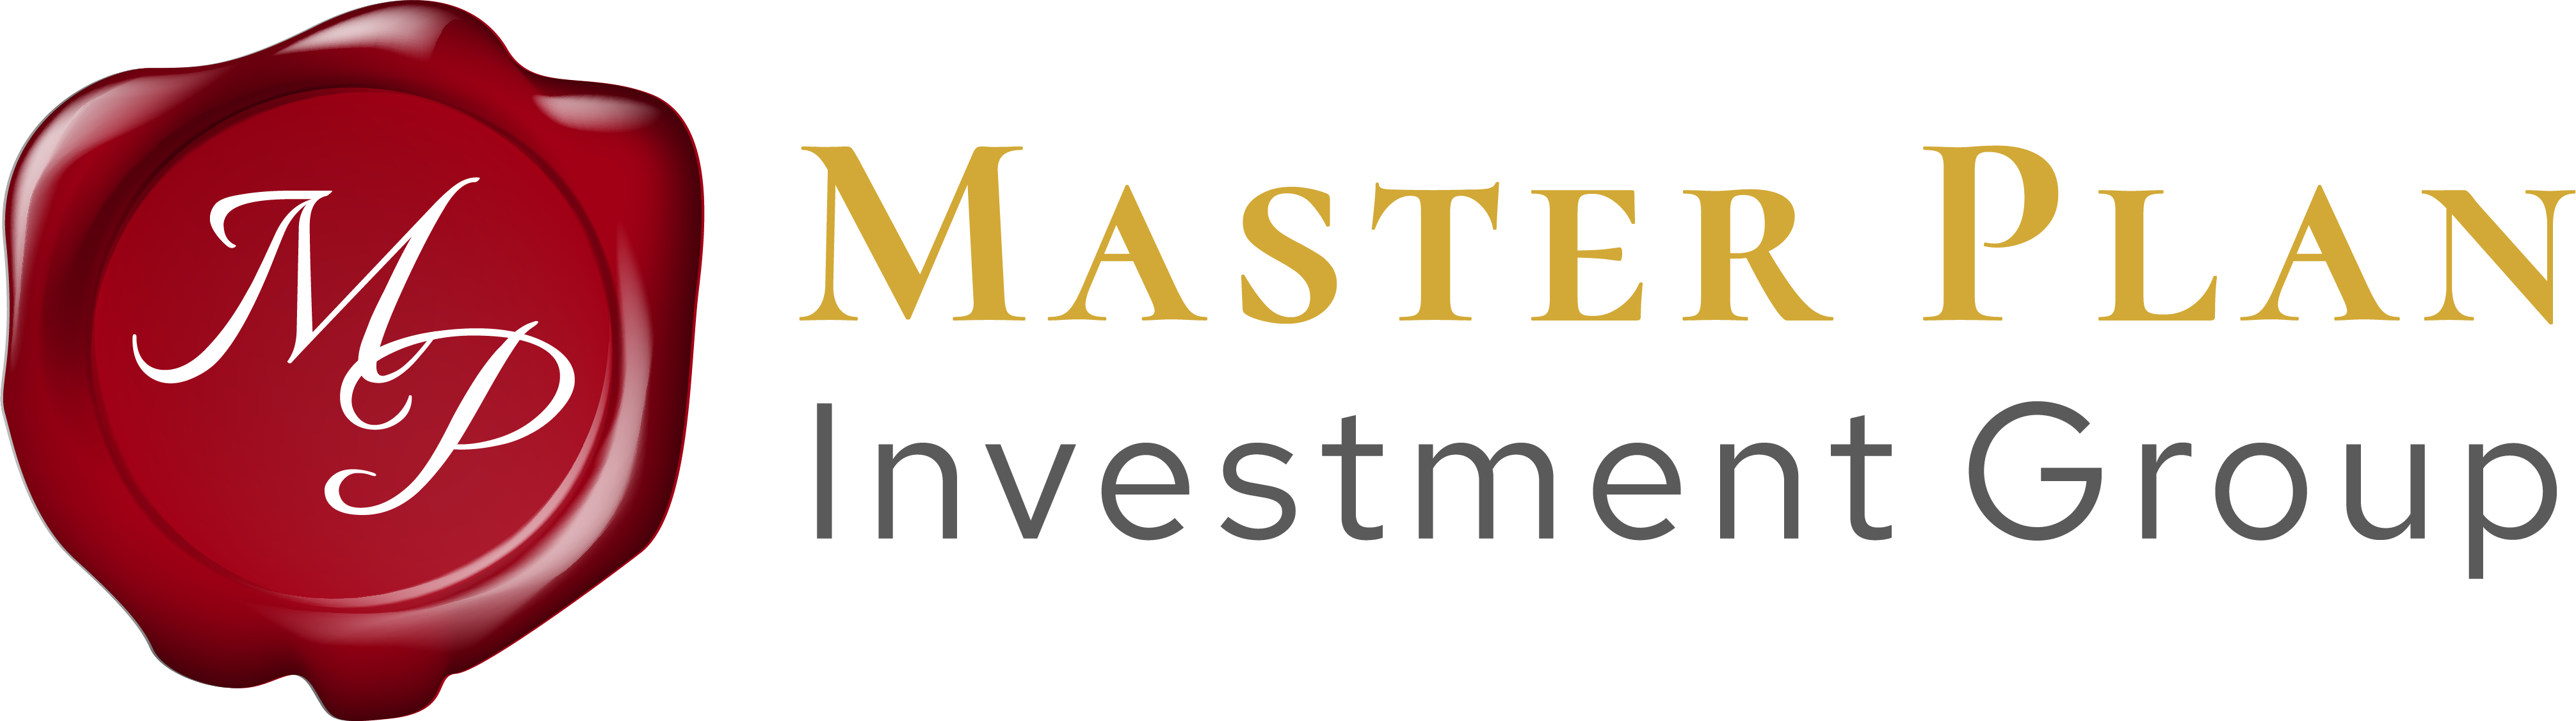 logo of Master Plan Investment Group